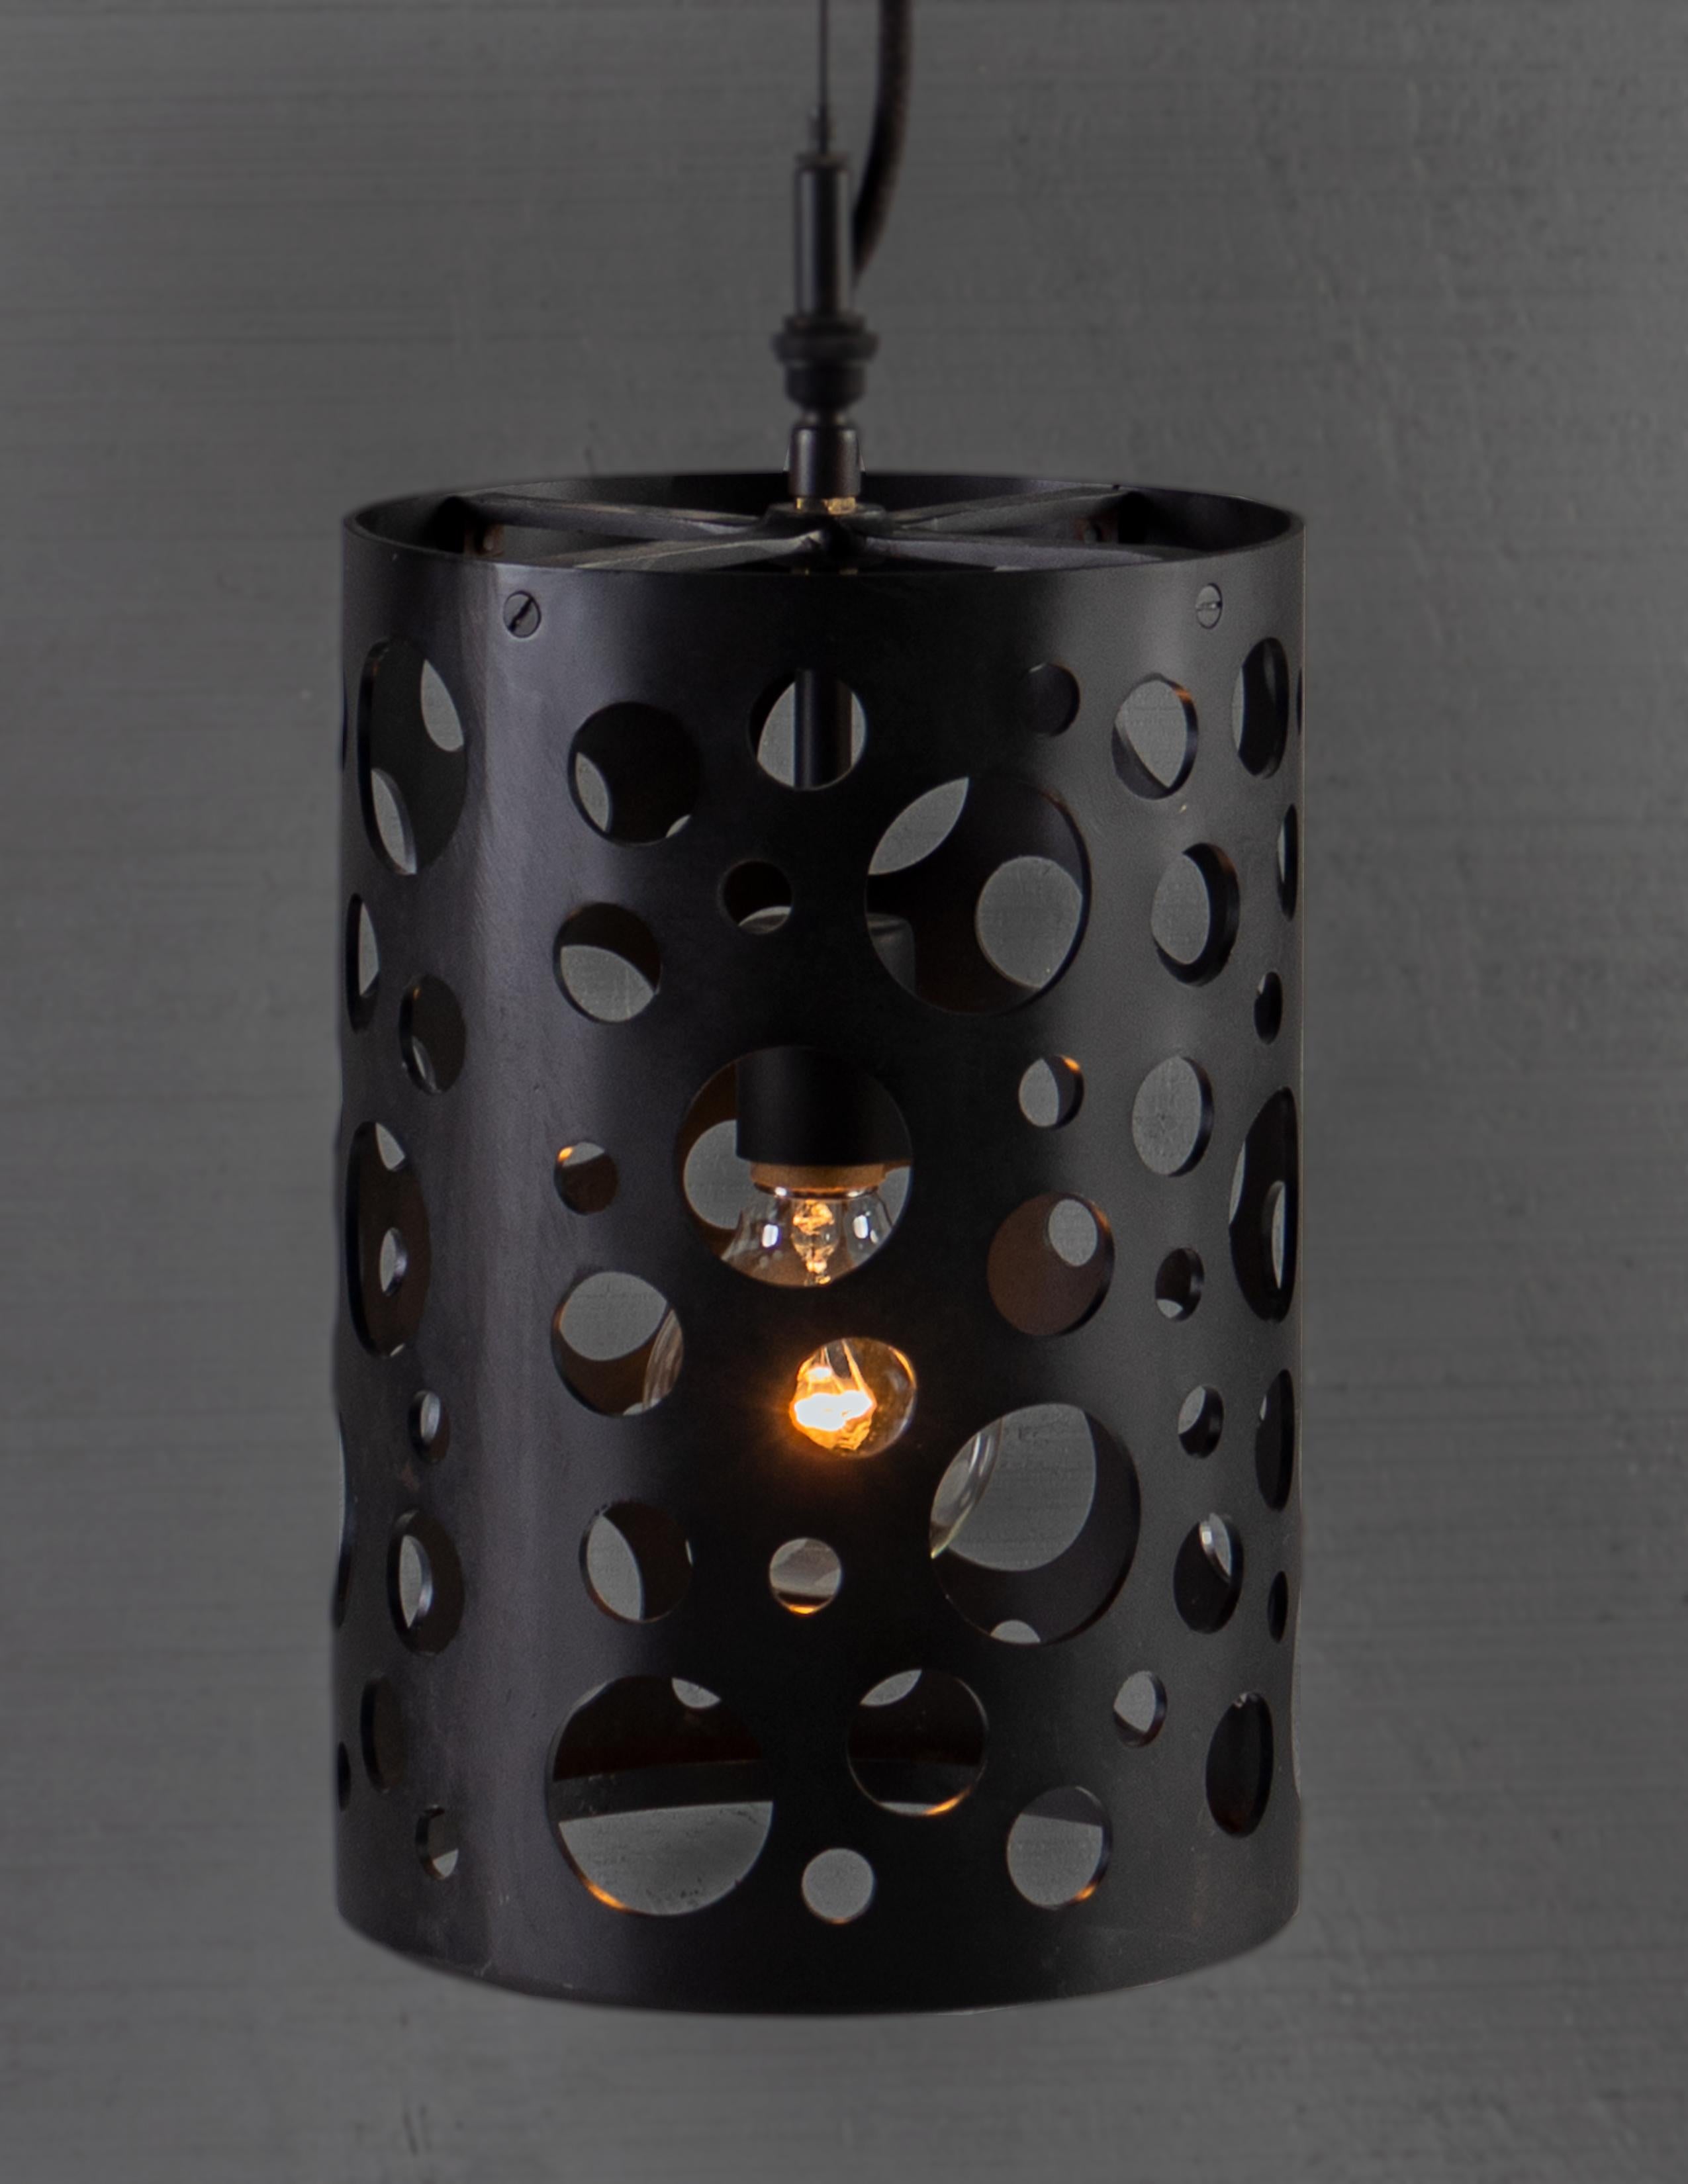 Punched steel, random circles. Perforated circular cut outs on cylindrical body pendant light. 

Bulb 1x medium base 75 watt incandescent. 

Handcrafted in Italy. Sold exclusively at Brendan Bass.

Minimum hanging height: N/A
Maximum hanging height